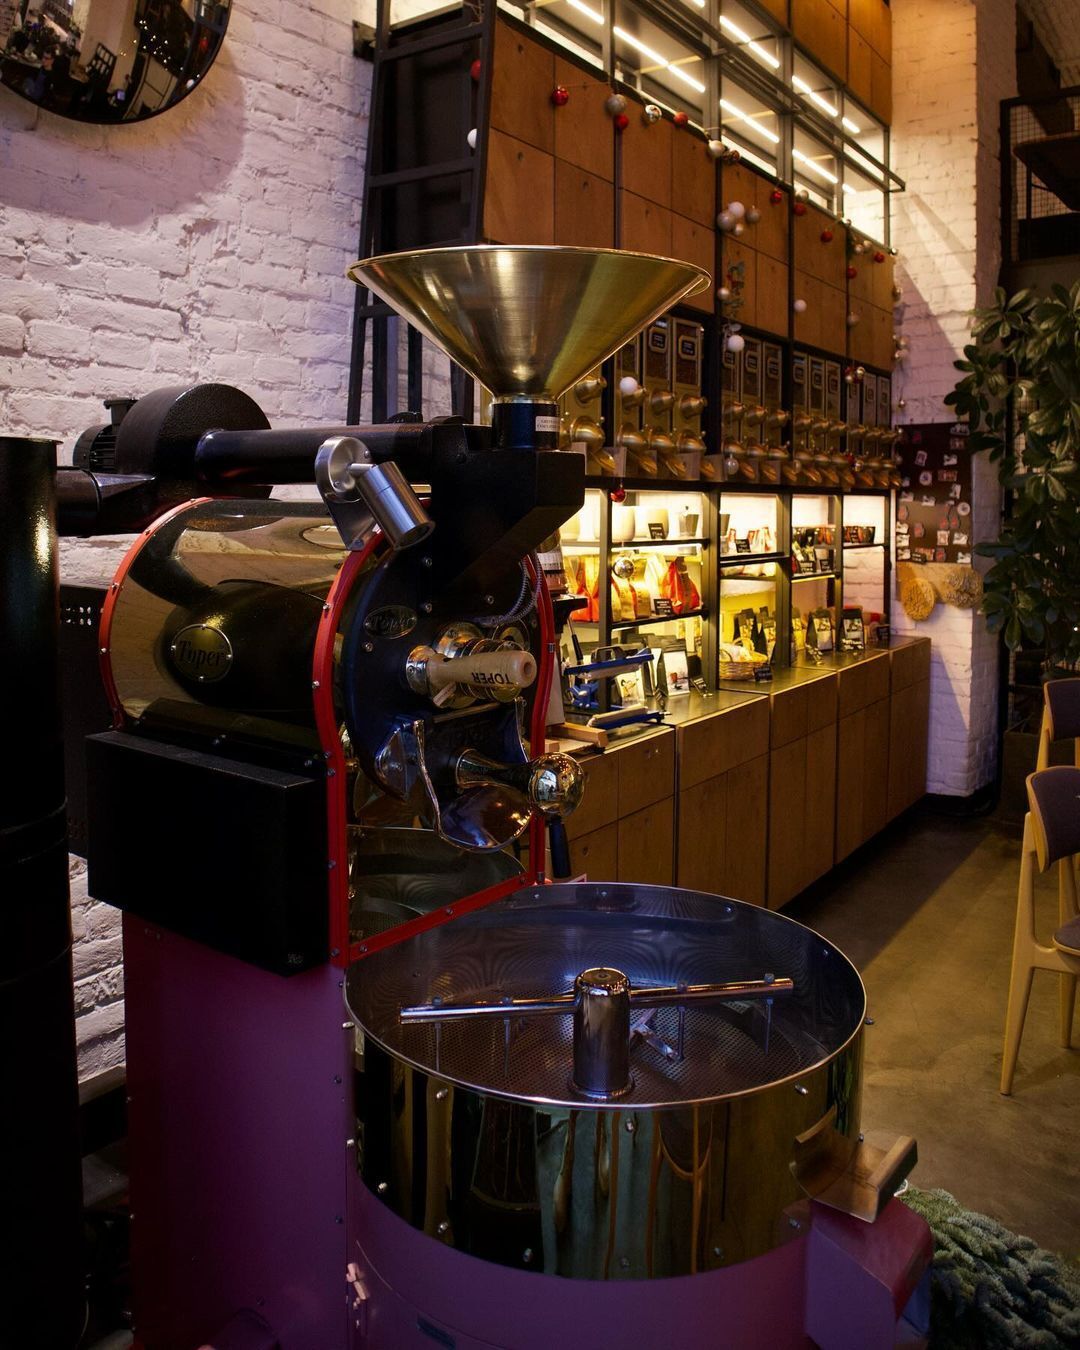 The most delicious coffee shops in Lviv. Where to warm up and enjoy this winter